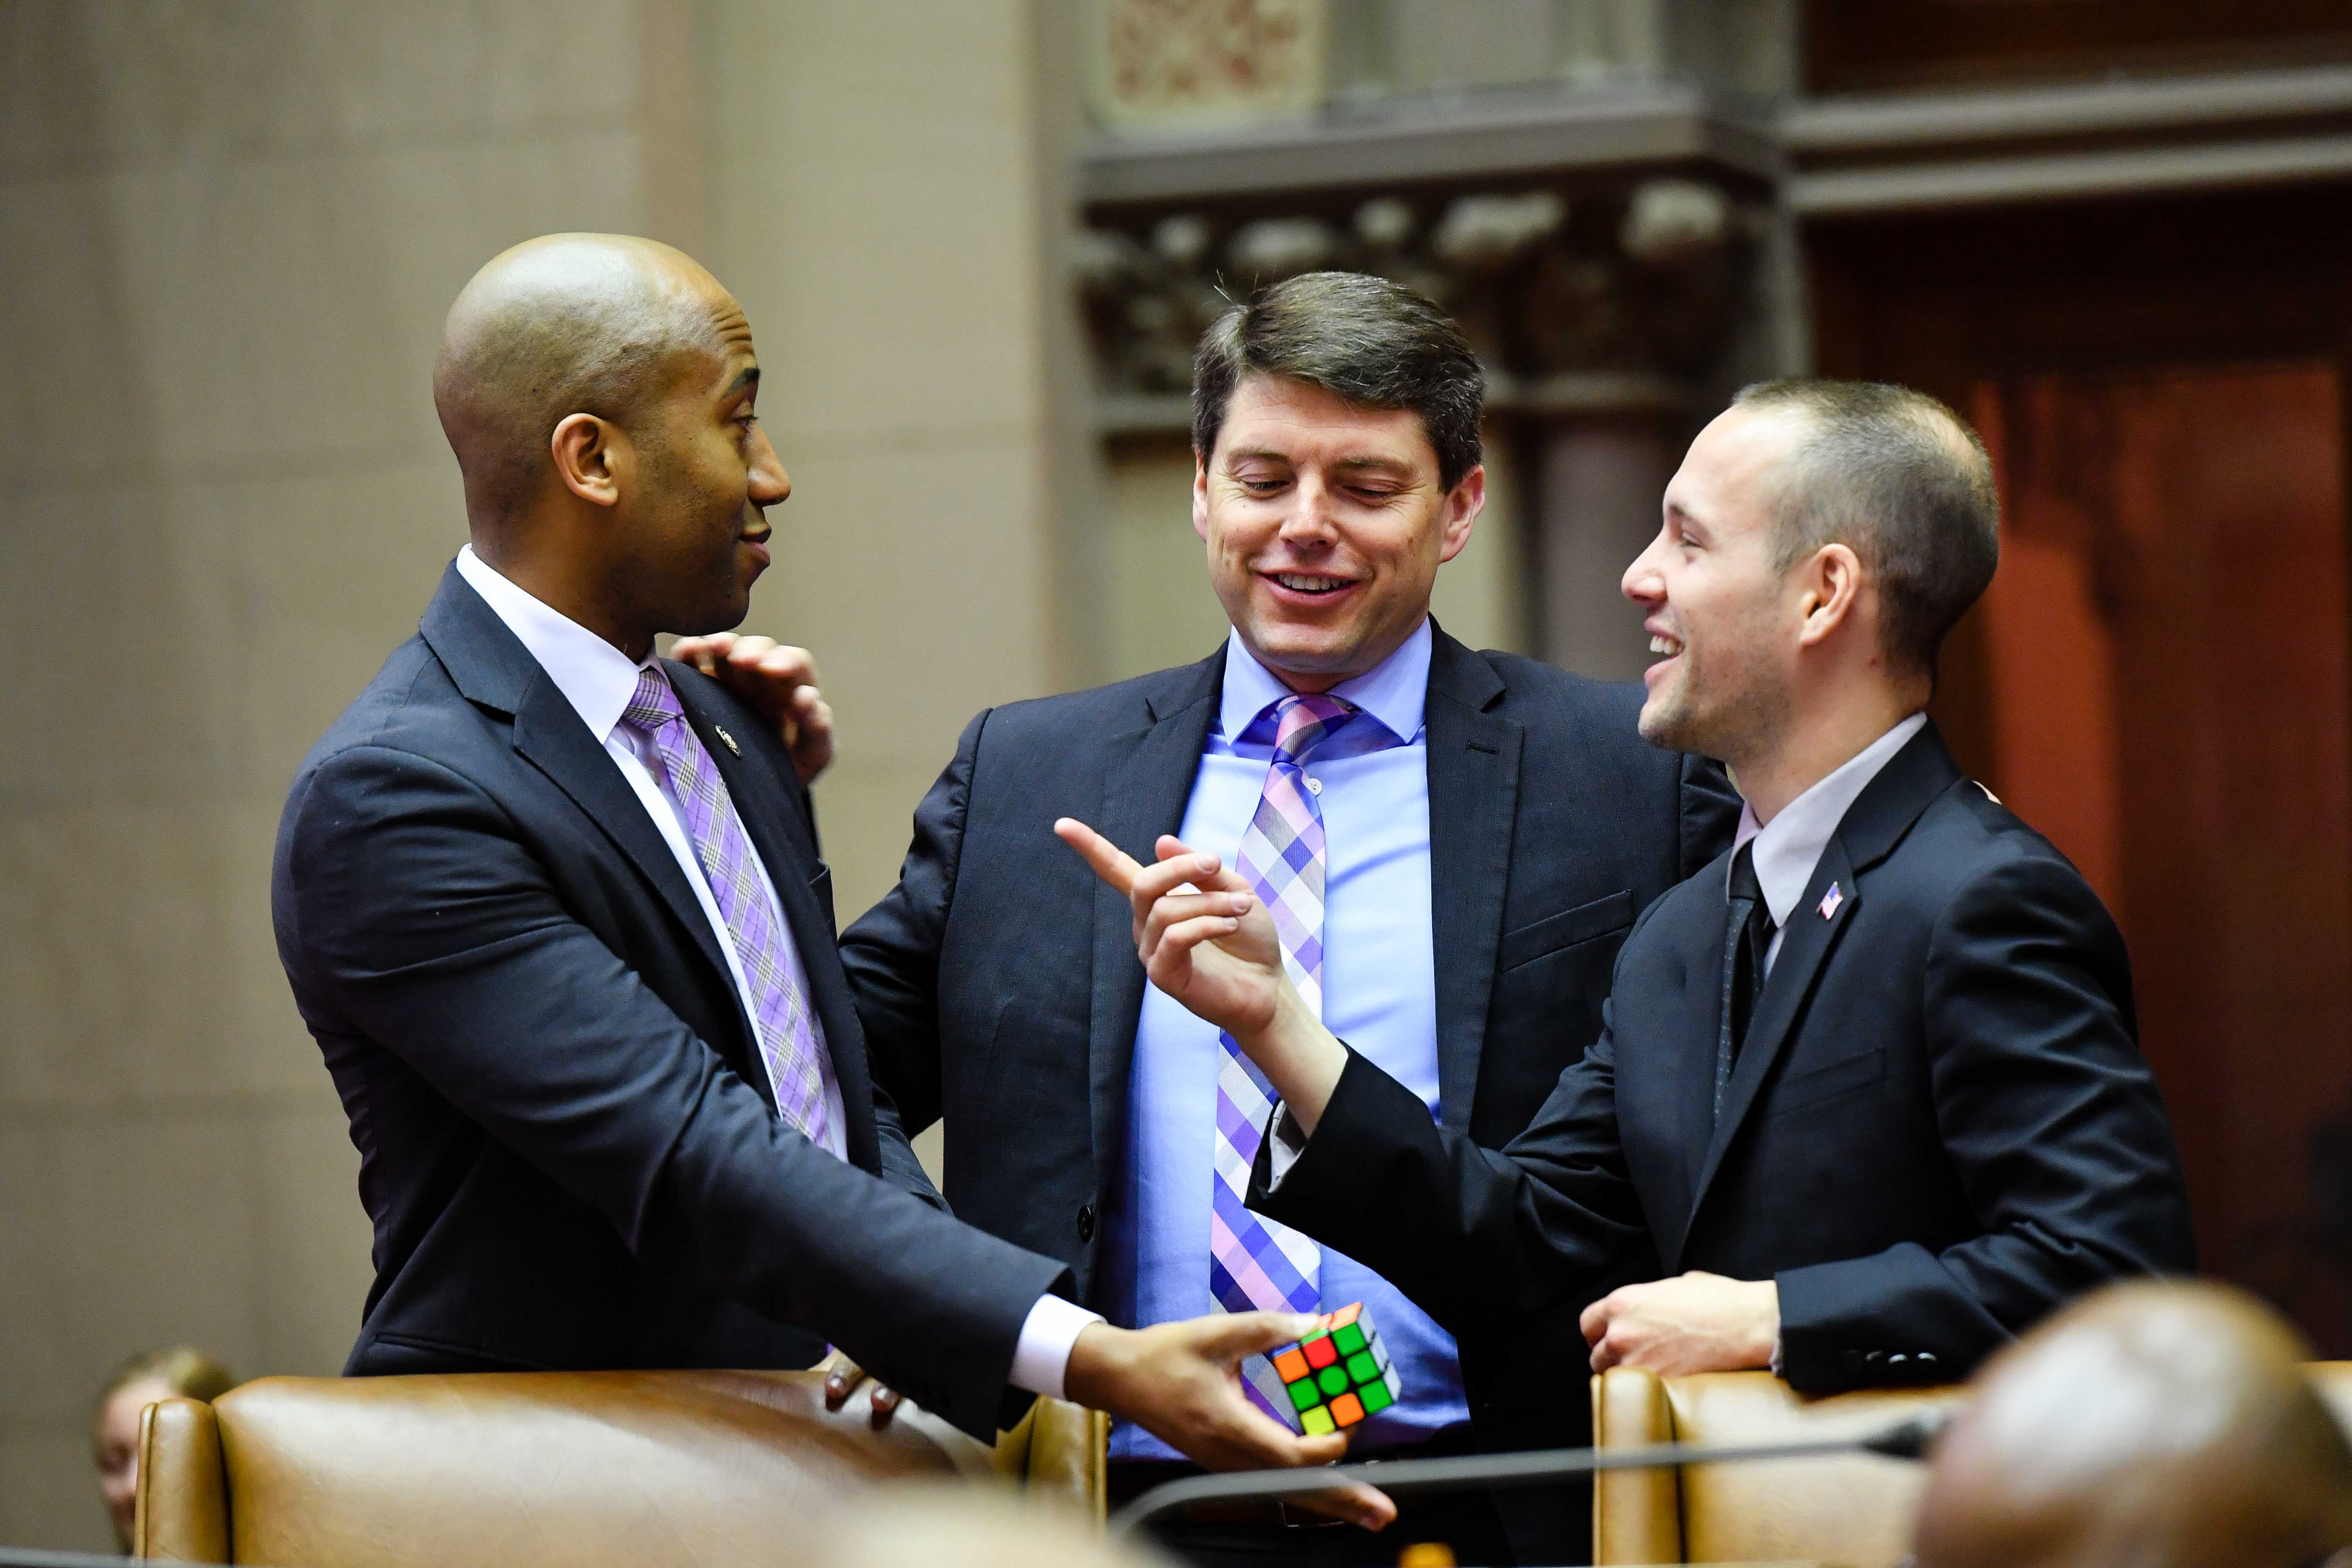 Assembly member Vanel bonding over Rubik’s cubes with Assembly colleagues.